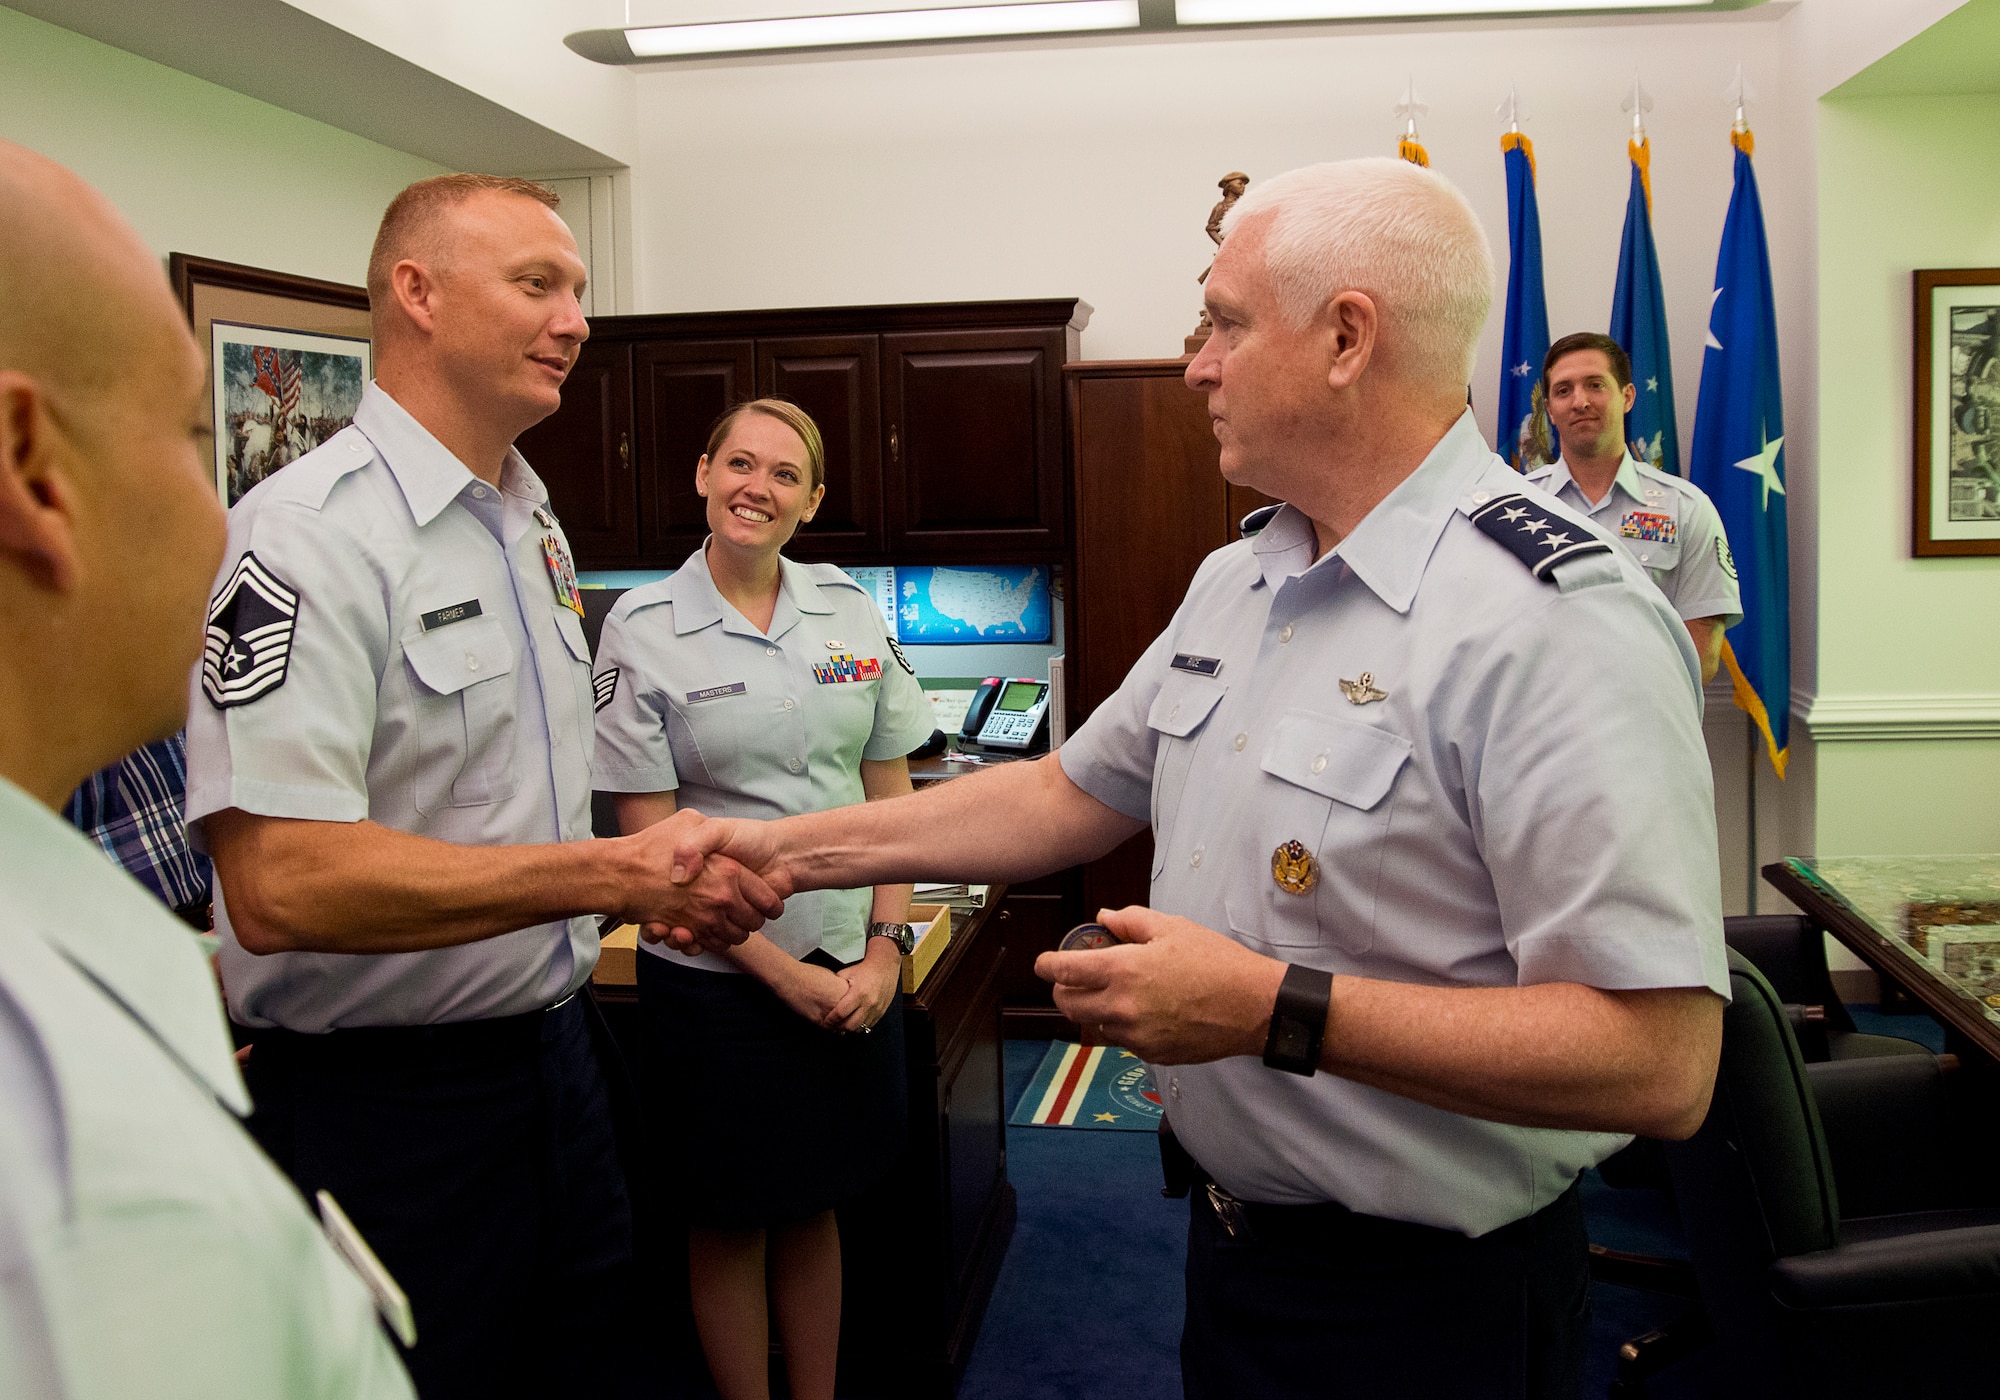 The Air National Guard's 2016 Outstanding Airmen of the Year tour the Pentagon and meet with Lt. Gen. L. Scott Rice, director of the Air National Guard, August 2, 2016. The event is part of the ANG's Focus on the Force Week, a series of events highlighting the importance of professional development at all levels, and the recognition of accomplishments throughout the enlisted corps. The OAY winners are Staff Sgt. Jennifer Masters, Airman of the Year; Tech. Sgt. Nicholas Jewell, Non-Commissioned Officer of the Year; Senior Master Sgt. Mark Farmer, Senior Non-Commissioned Officer of the Year; and Senior Master Sgt. Jack Minaya, First Sergeant of the Year. (U.S. Air National Guard photo by Staff Sgt. John Hillier)